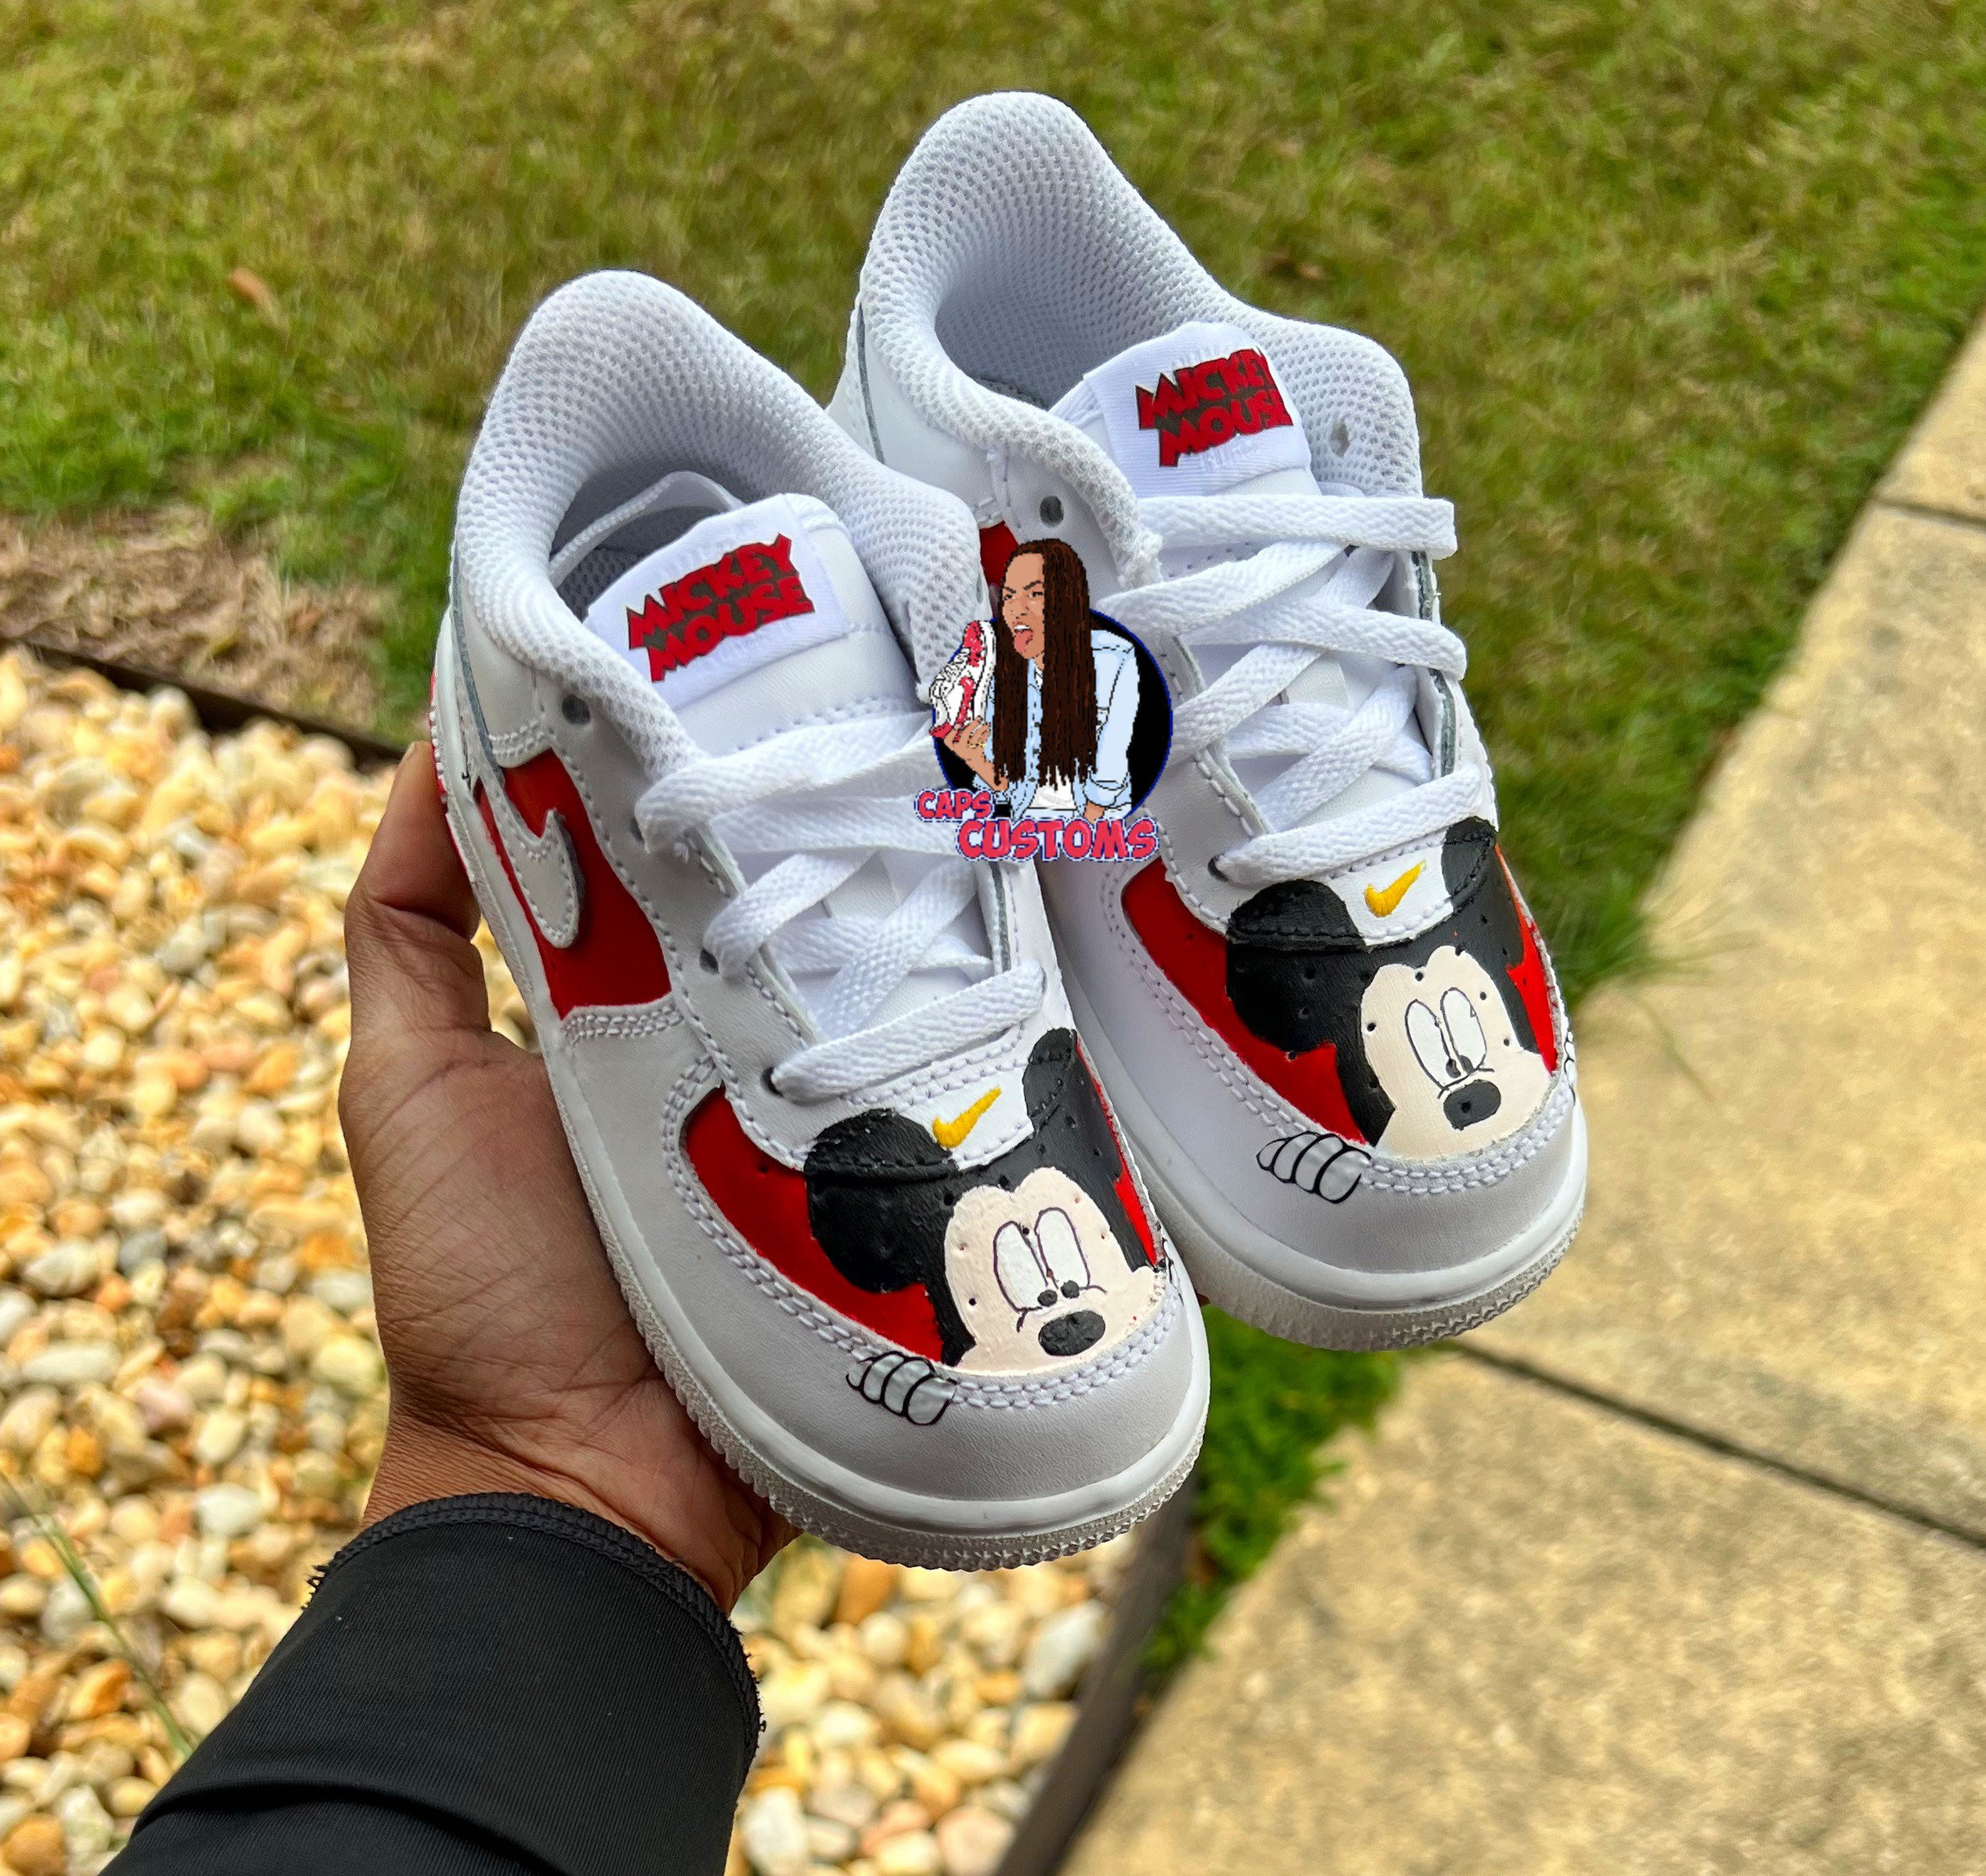 740 ✰ PAINTED AIRFORCE ONES ✰ ideas